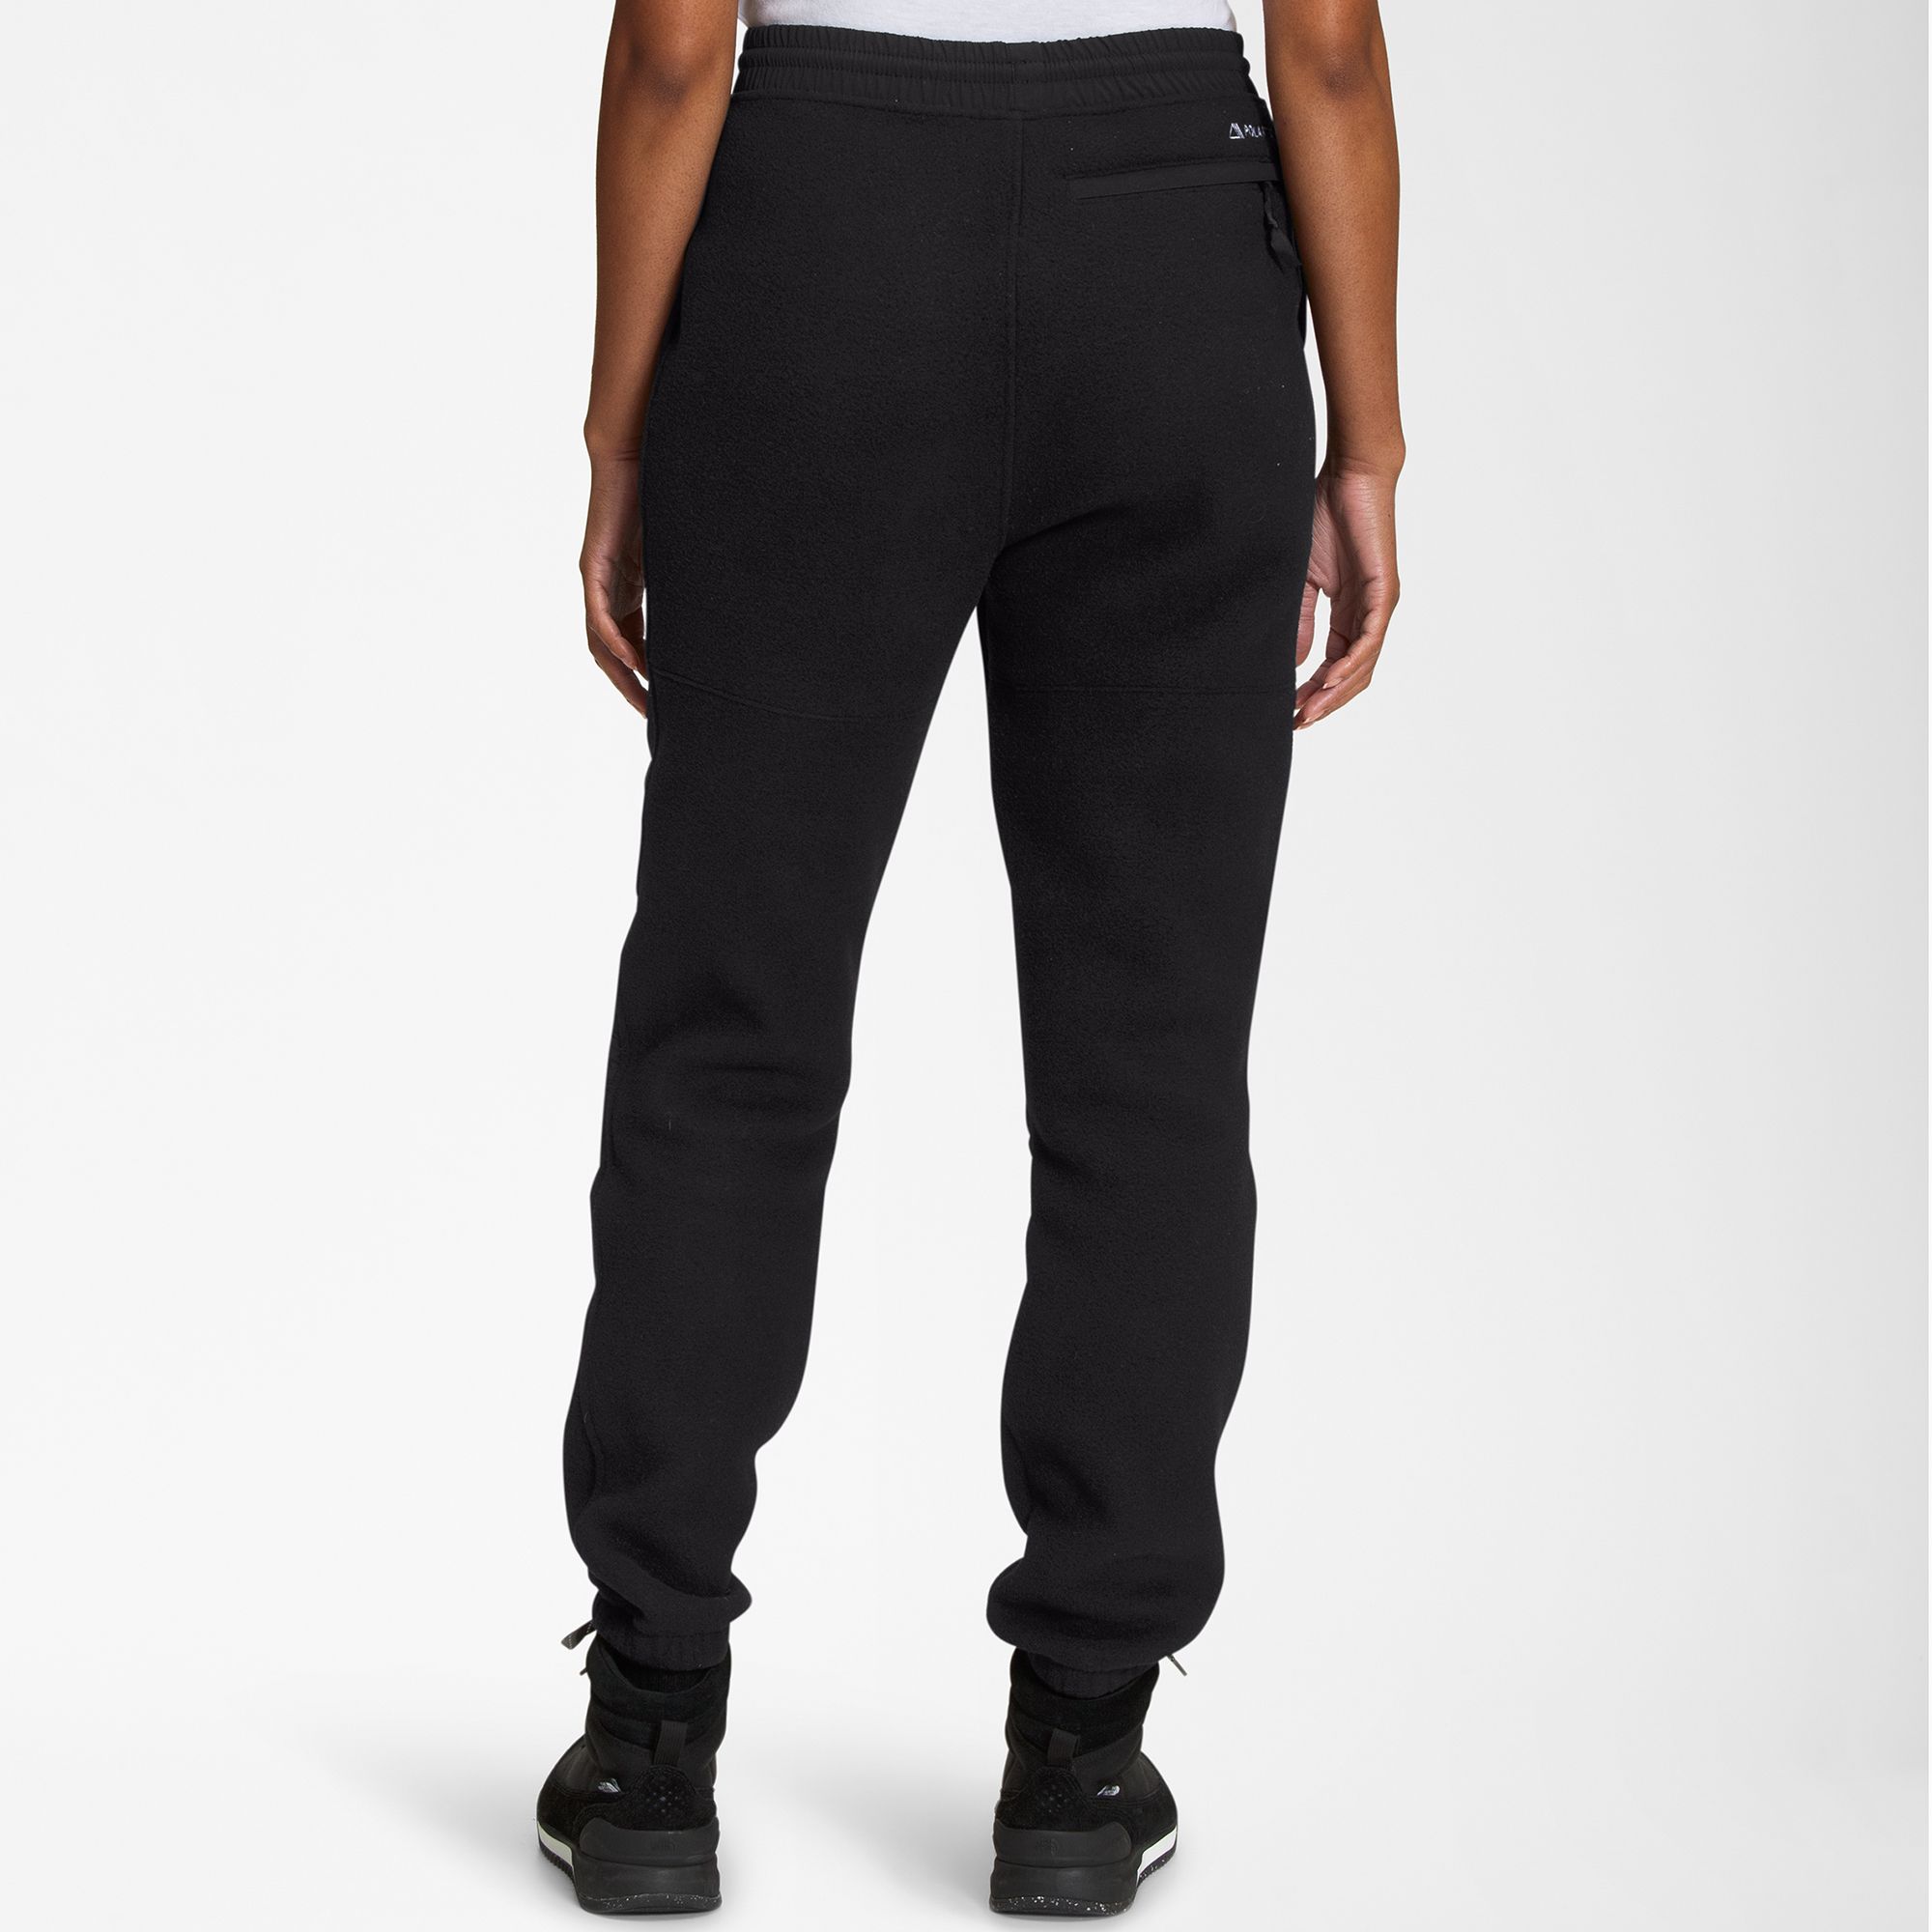 Dick's Sporting Goods The North Face Women's Denali Pants | The 